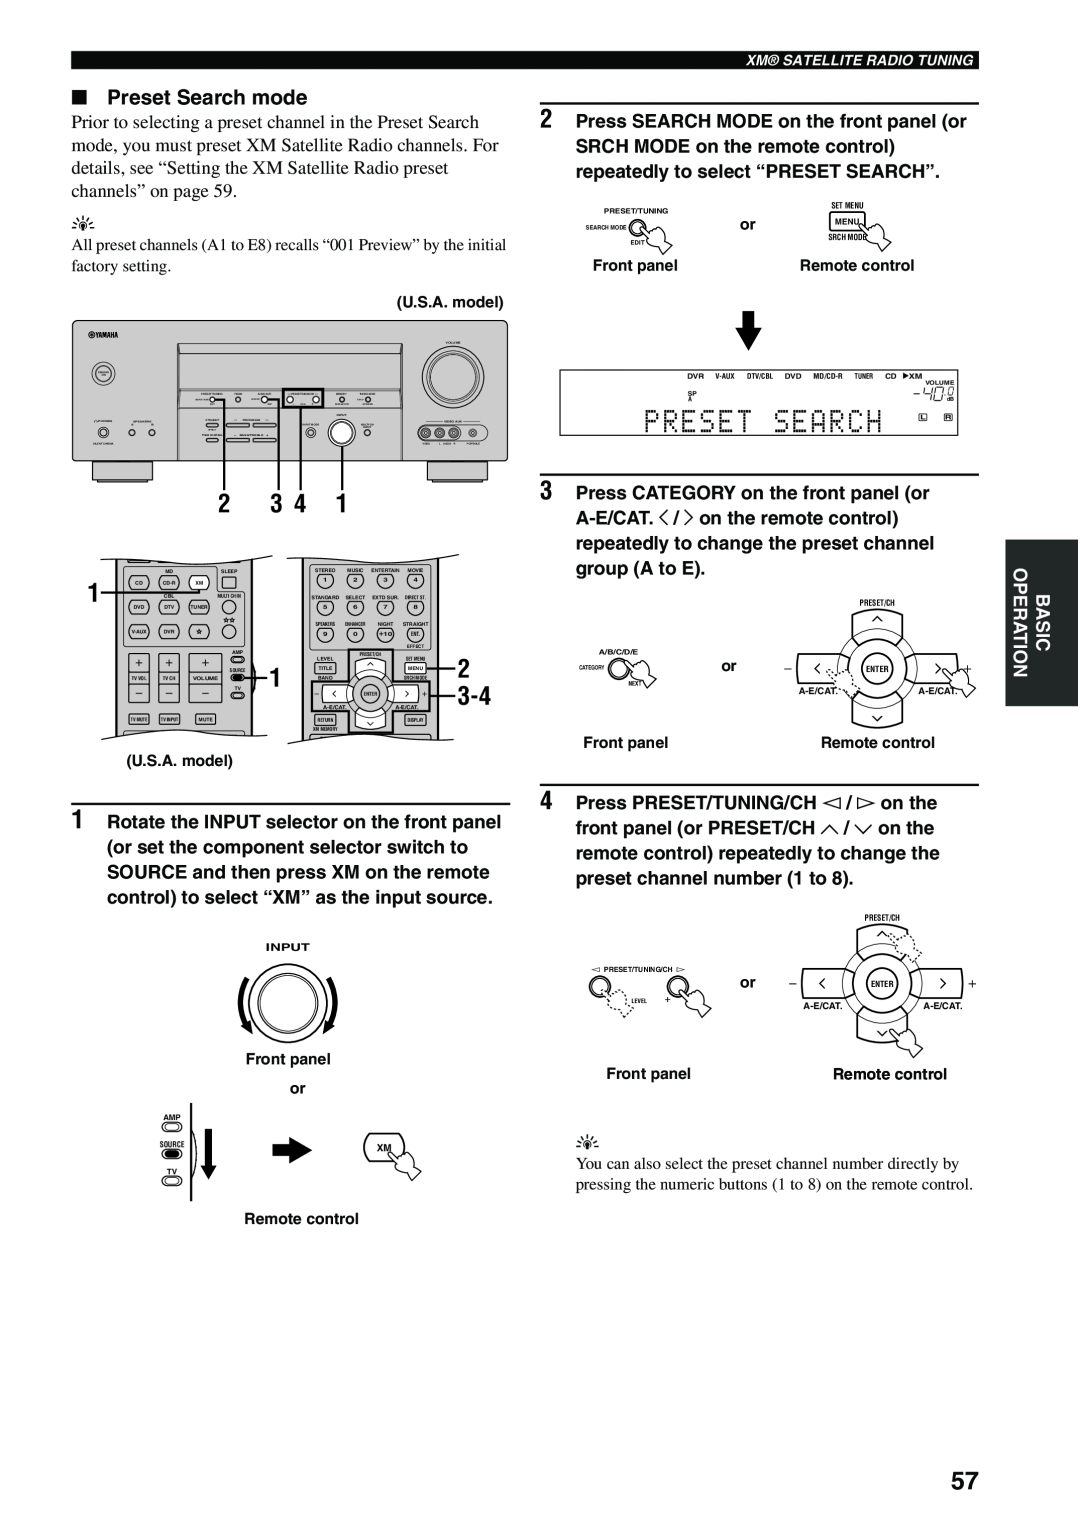 Yamaha HTR-5940 AV owner manual Preset Search L R, Preset Search mode, Press CATEGORY on the front panel or, group A to E 